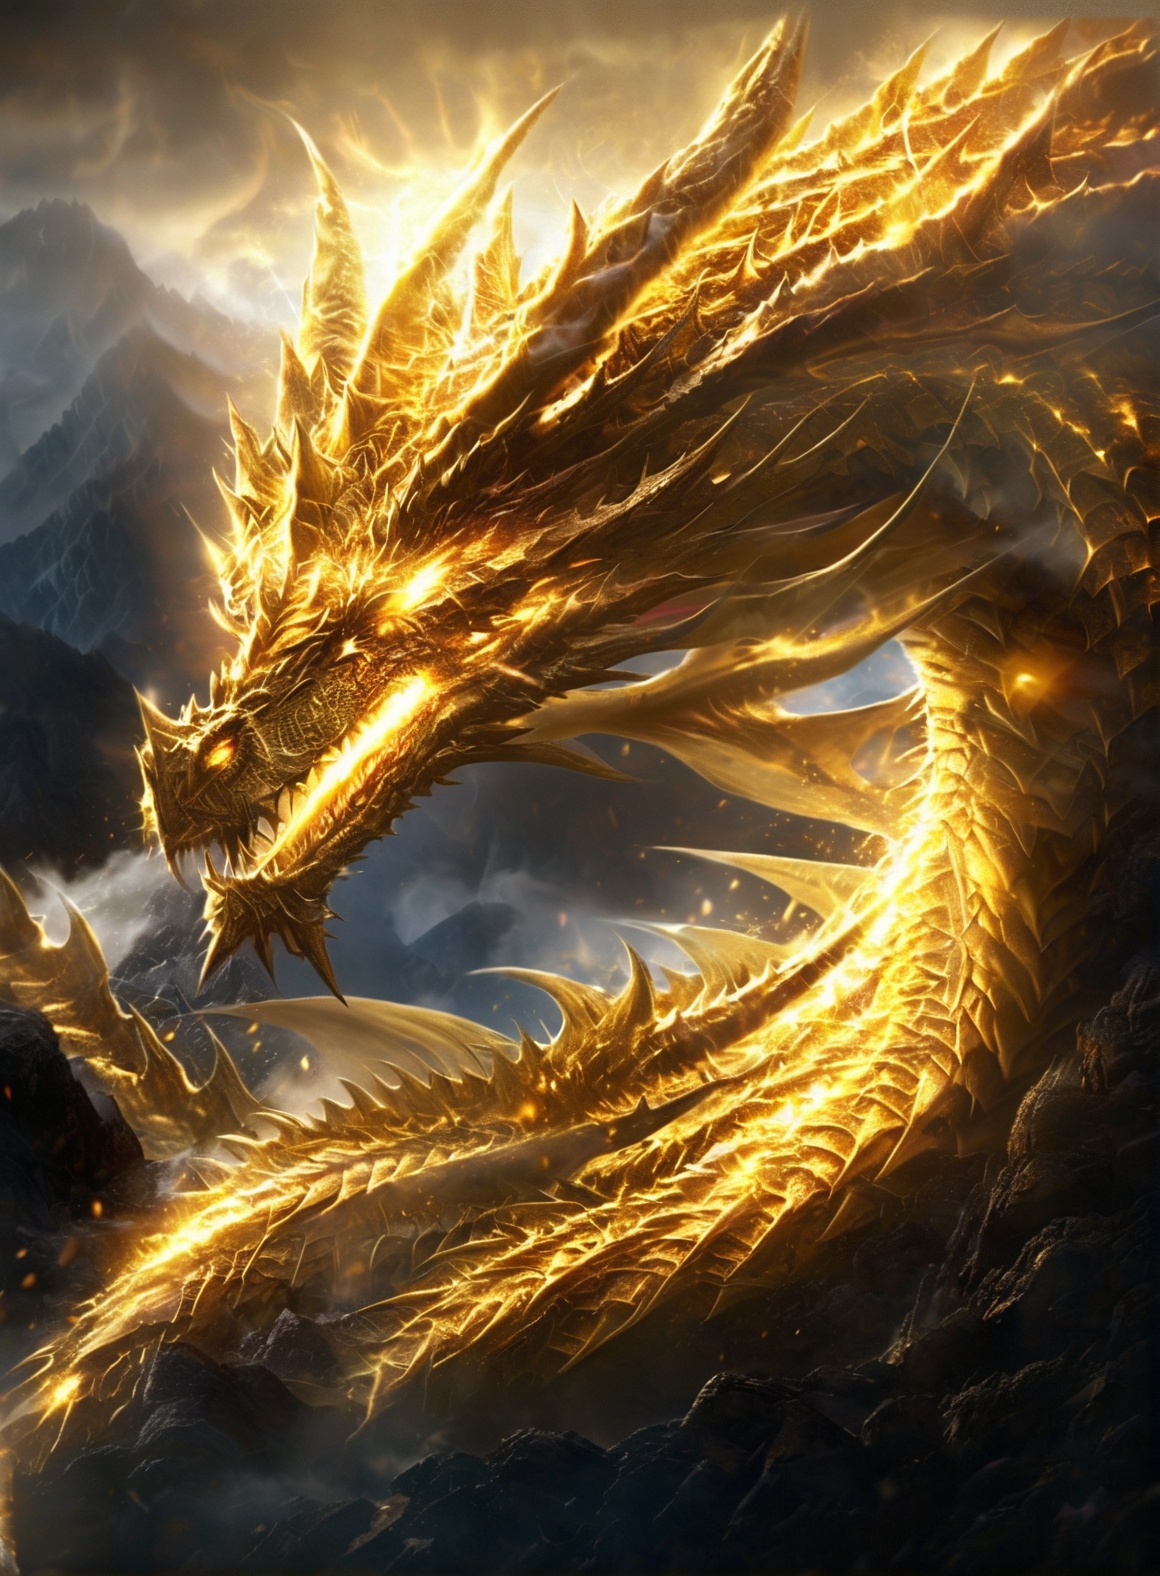 a majestic, golden dragon with intricate scales and sharp, menacing features. The dragon's eyes are glowing with an intense, fiery light, and it appears to be emerging from a misty, mountainous terrain. The dragon's scales are adorned with golden patterns, and its mouth is open, revealing sharp teeth. The overall ambiance of the image is dramatic and awe-inspiring, with the dragon seemingly emerging as a powerful and formidable force<lora:KING Gardon-000010:1>